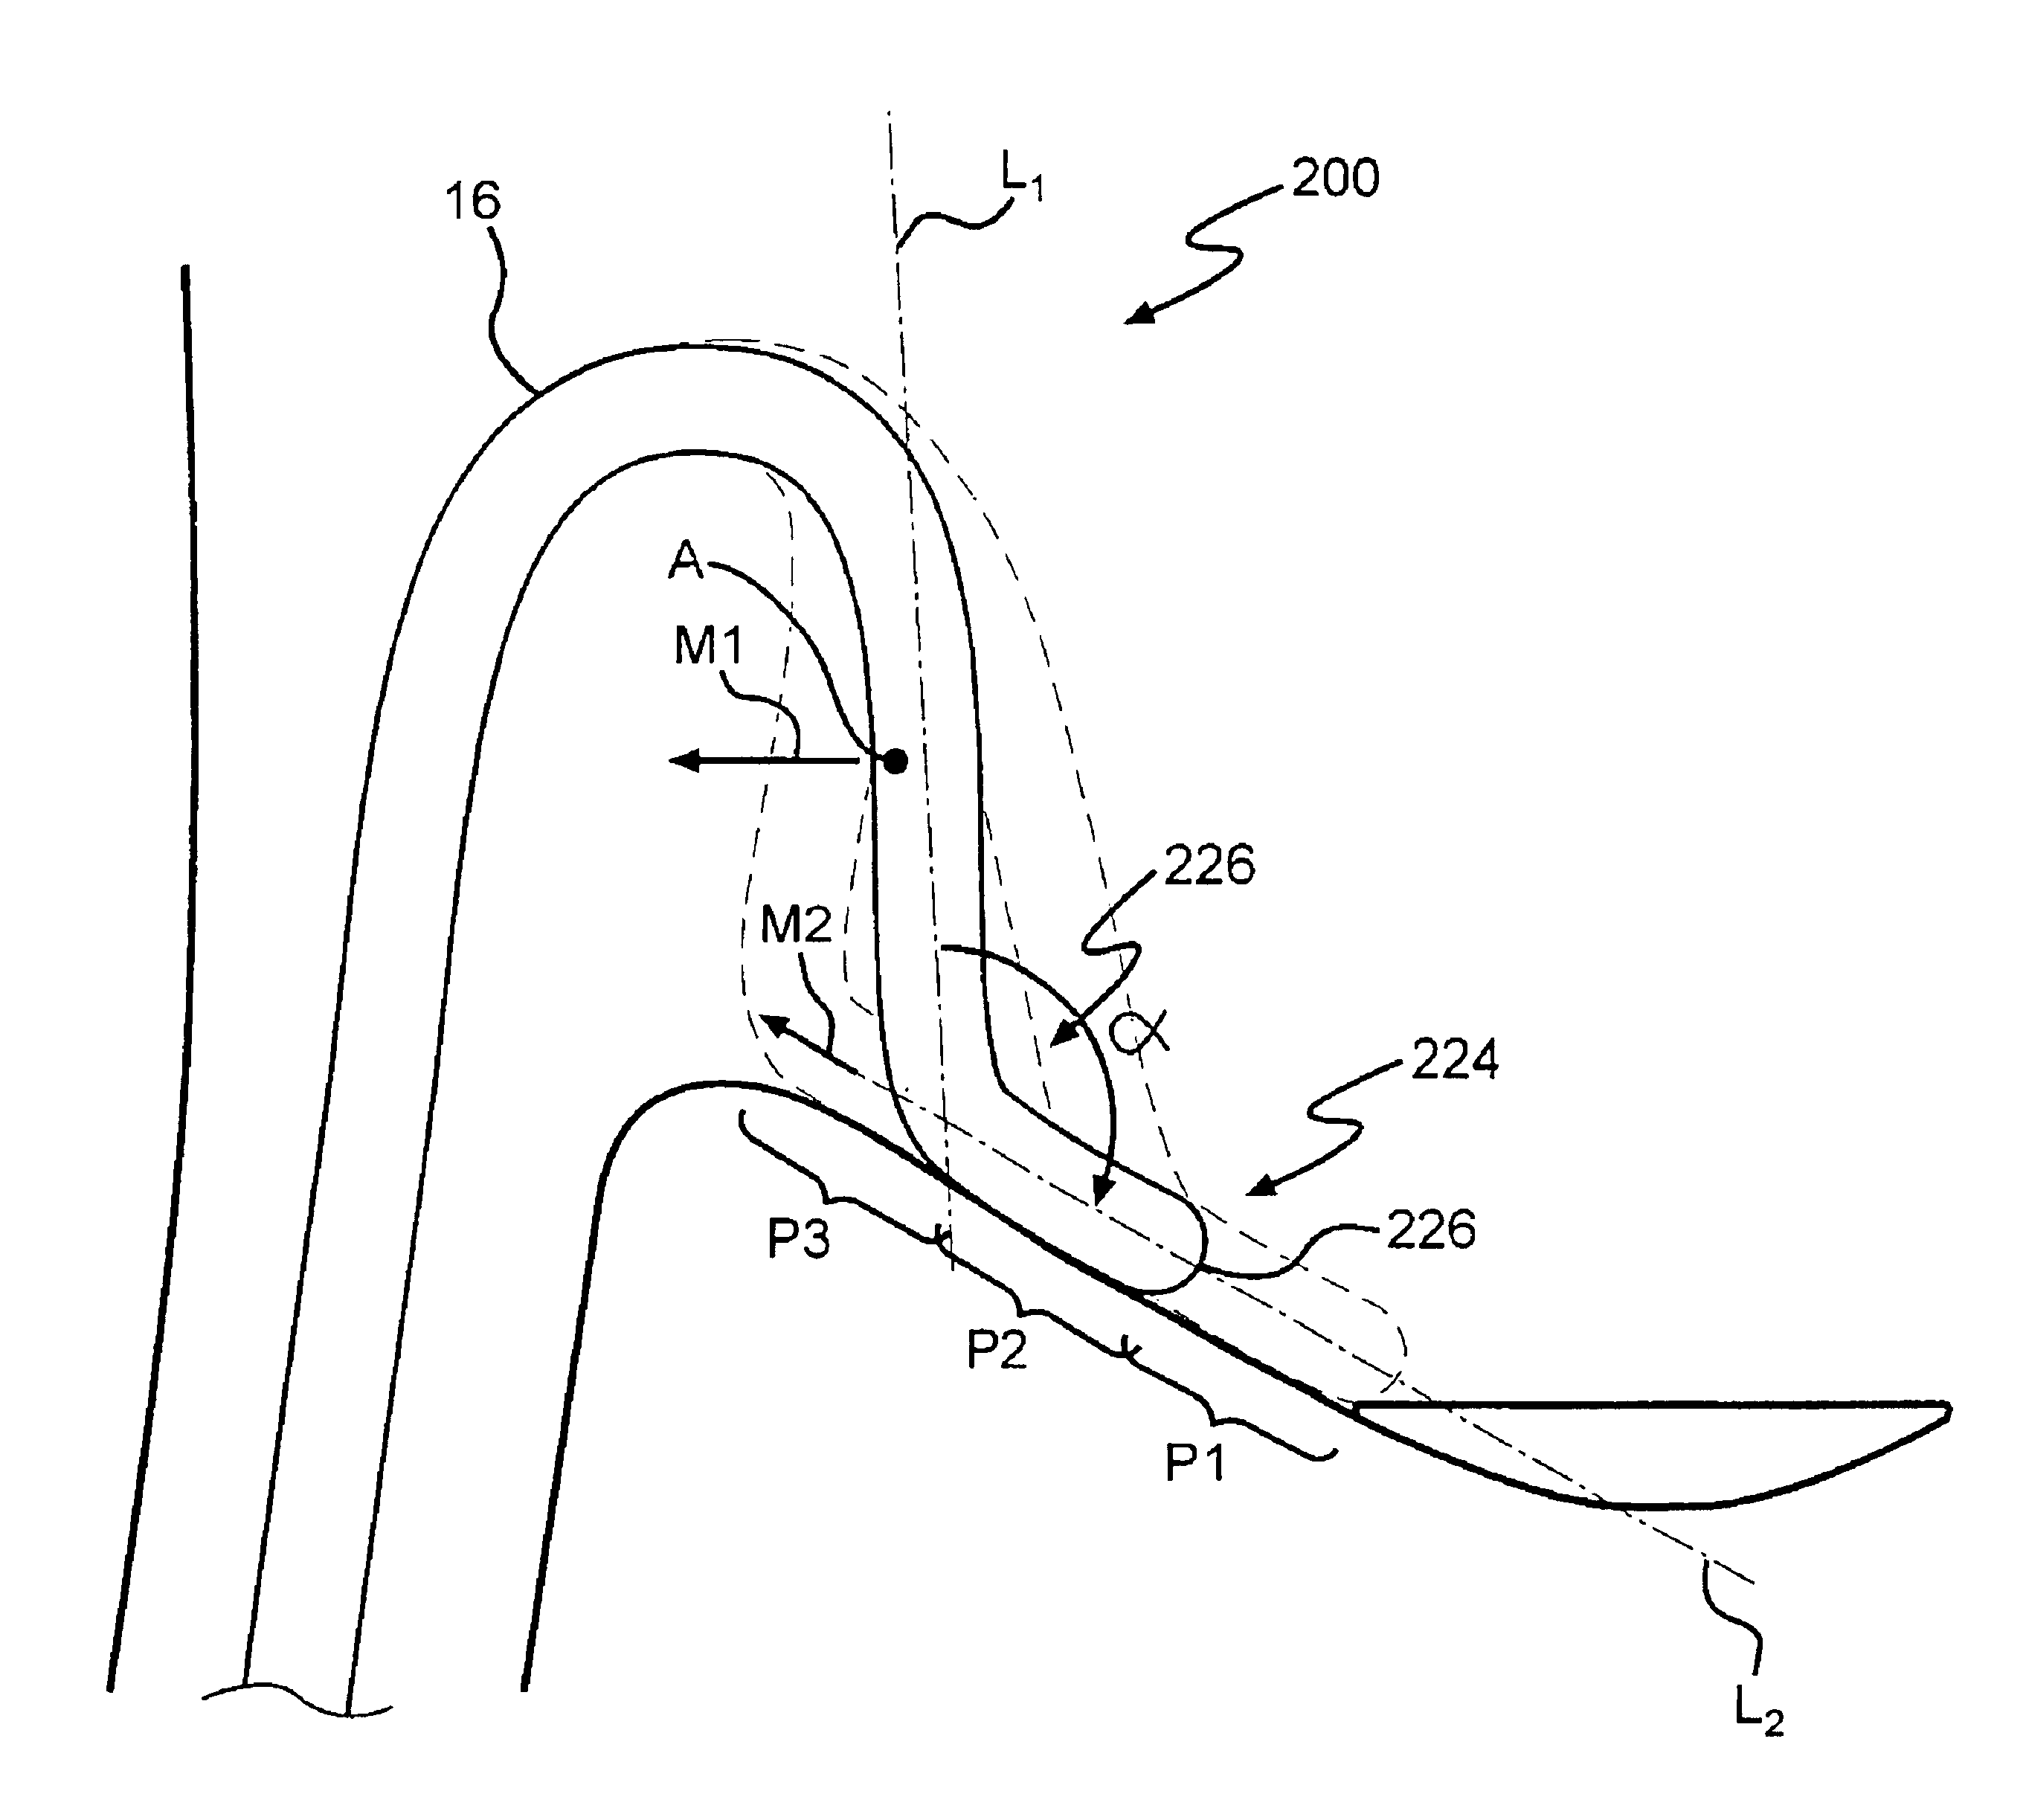 Ablation instrument having a flexible distal portion